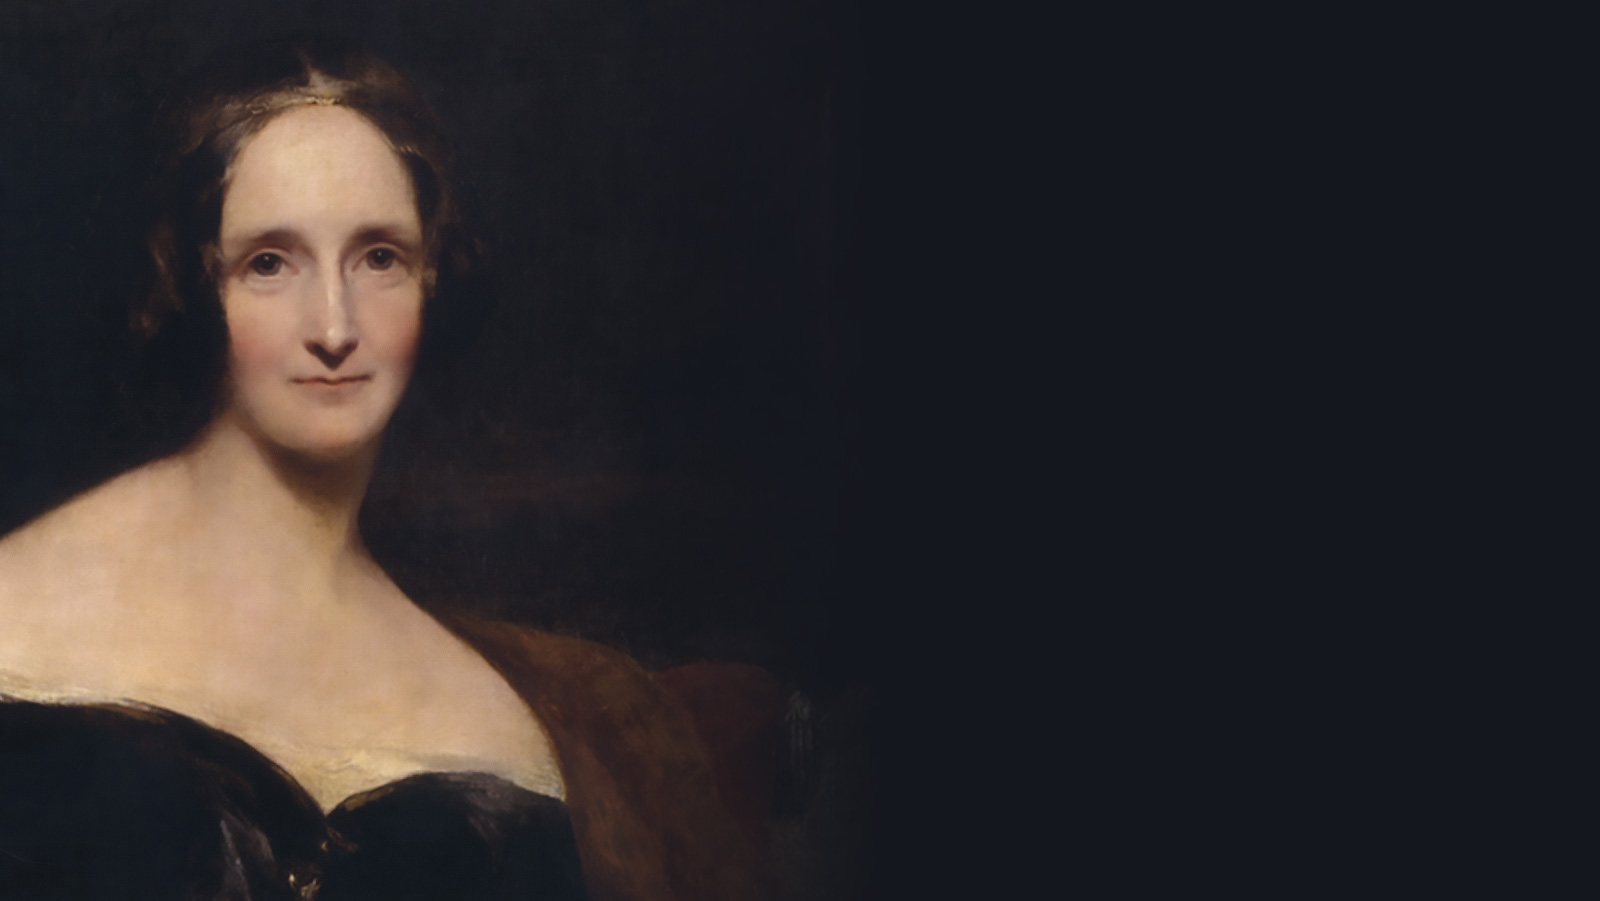 Portrait of Mary Shelley